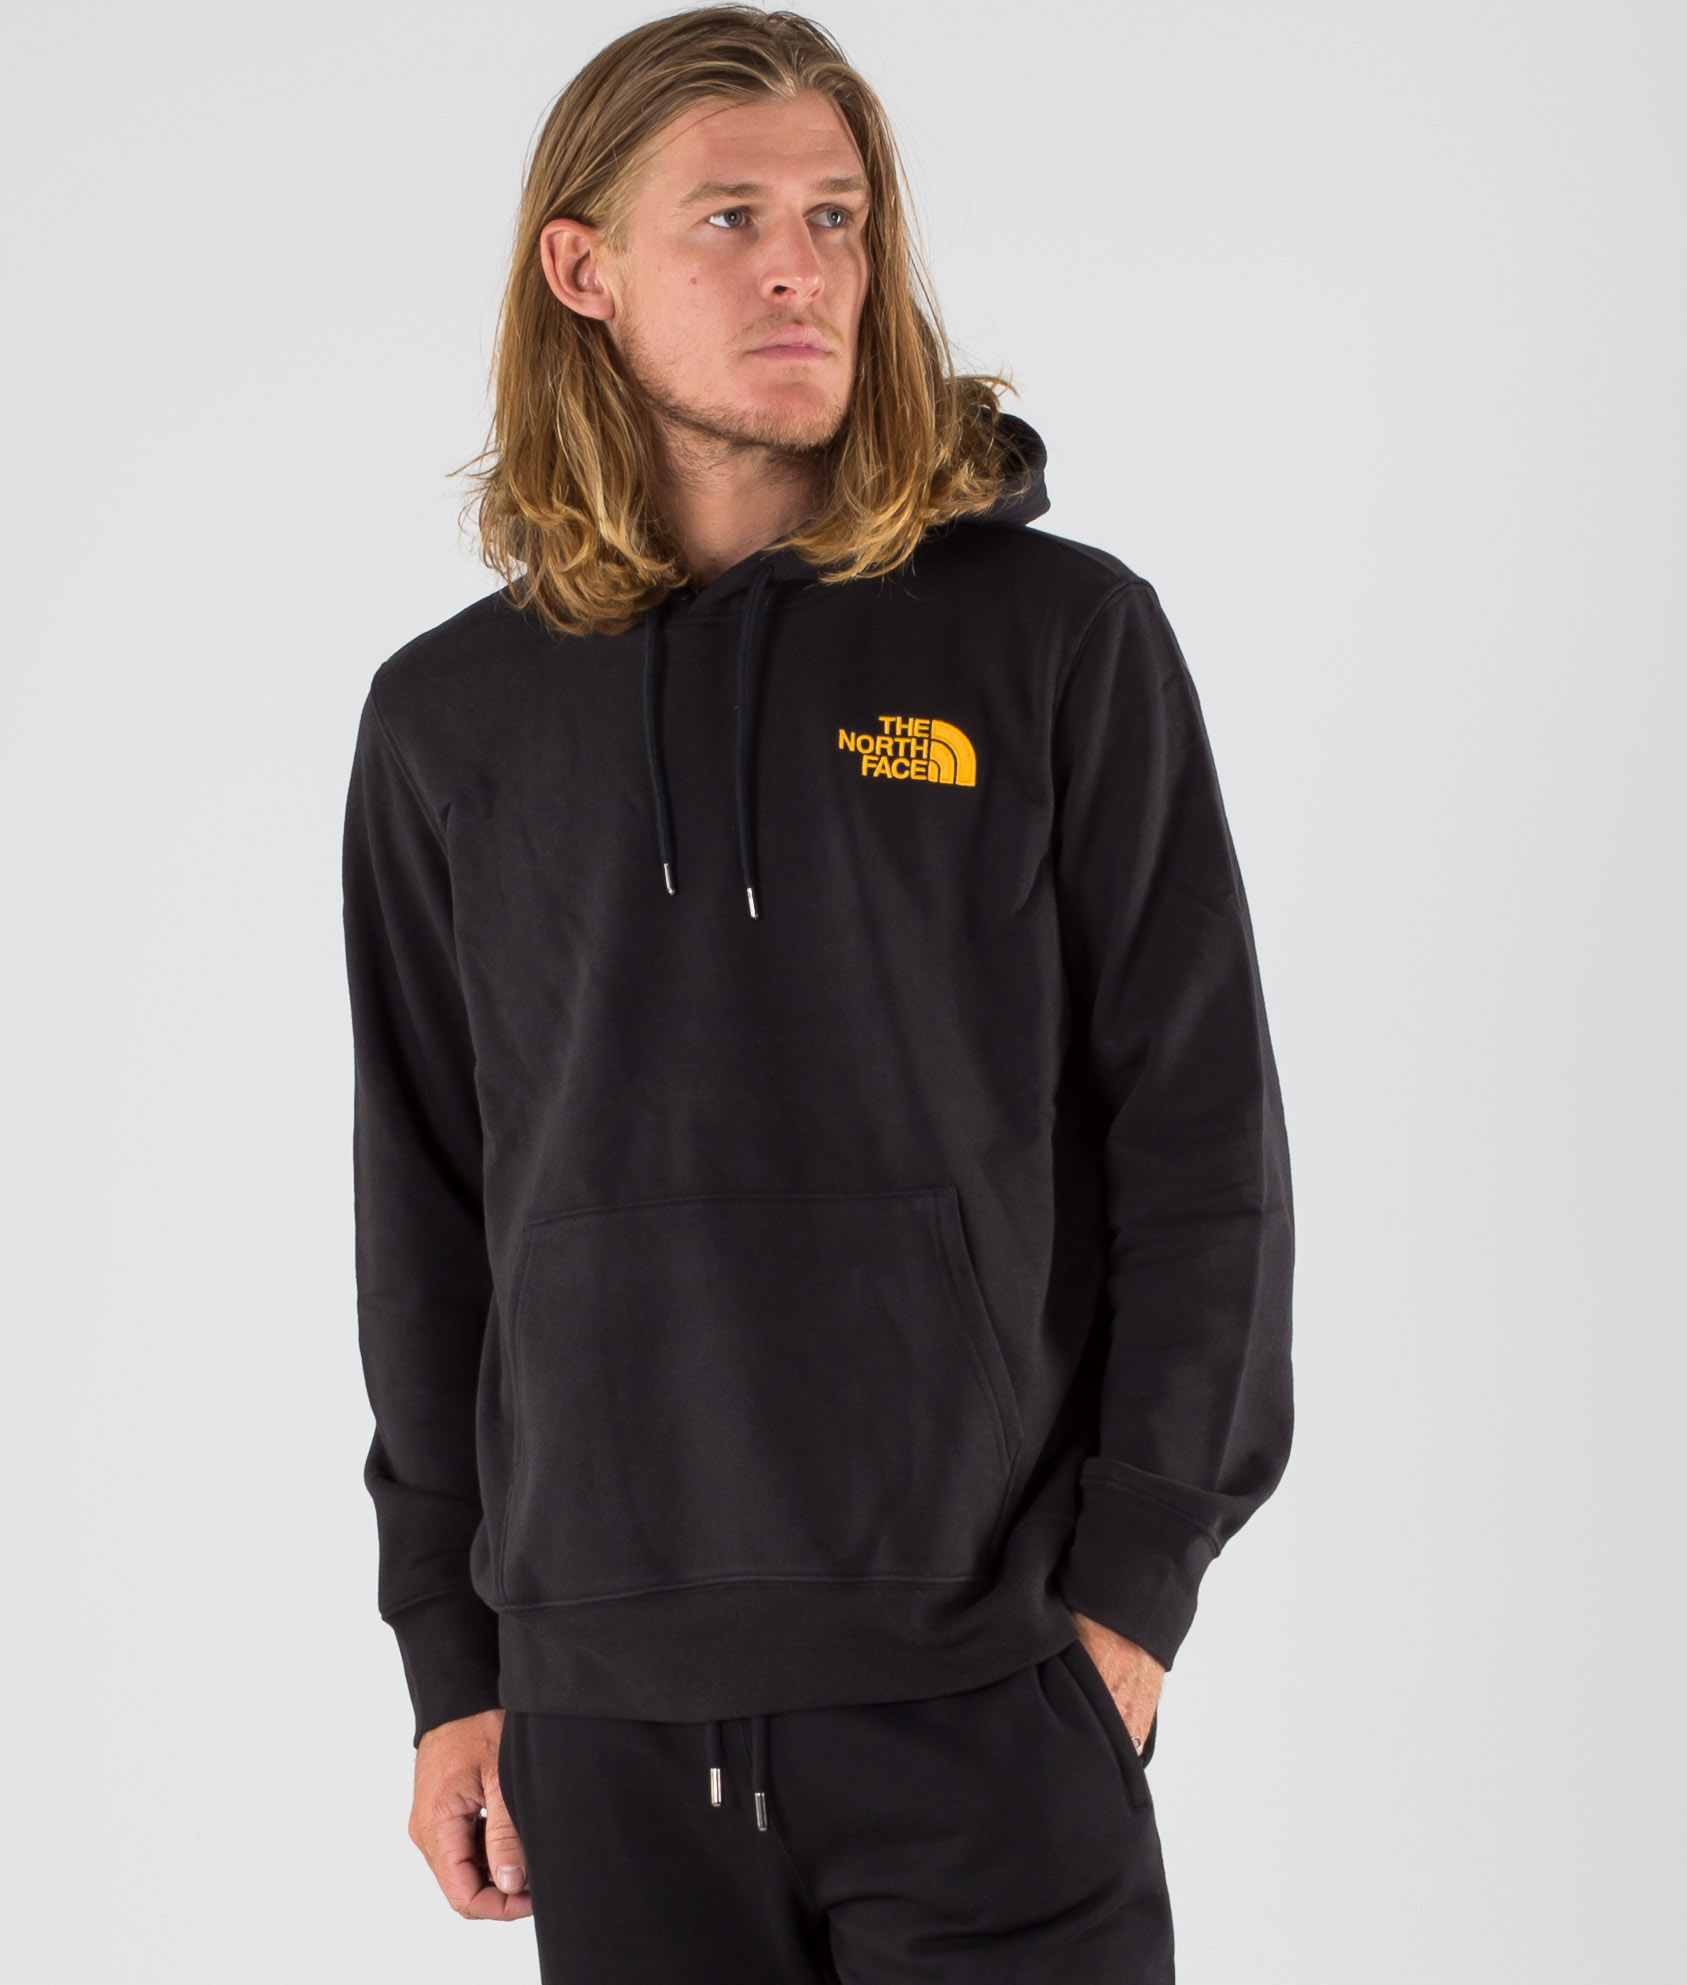 black and gold north face hoodie